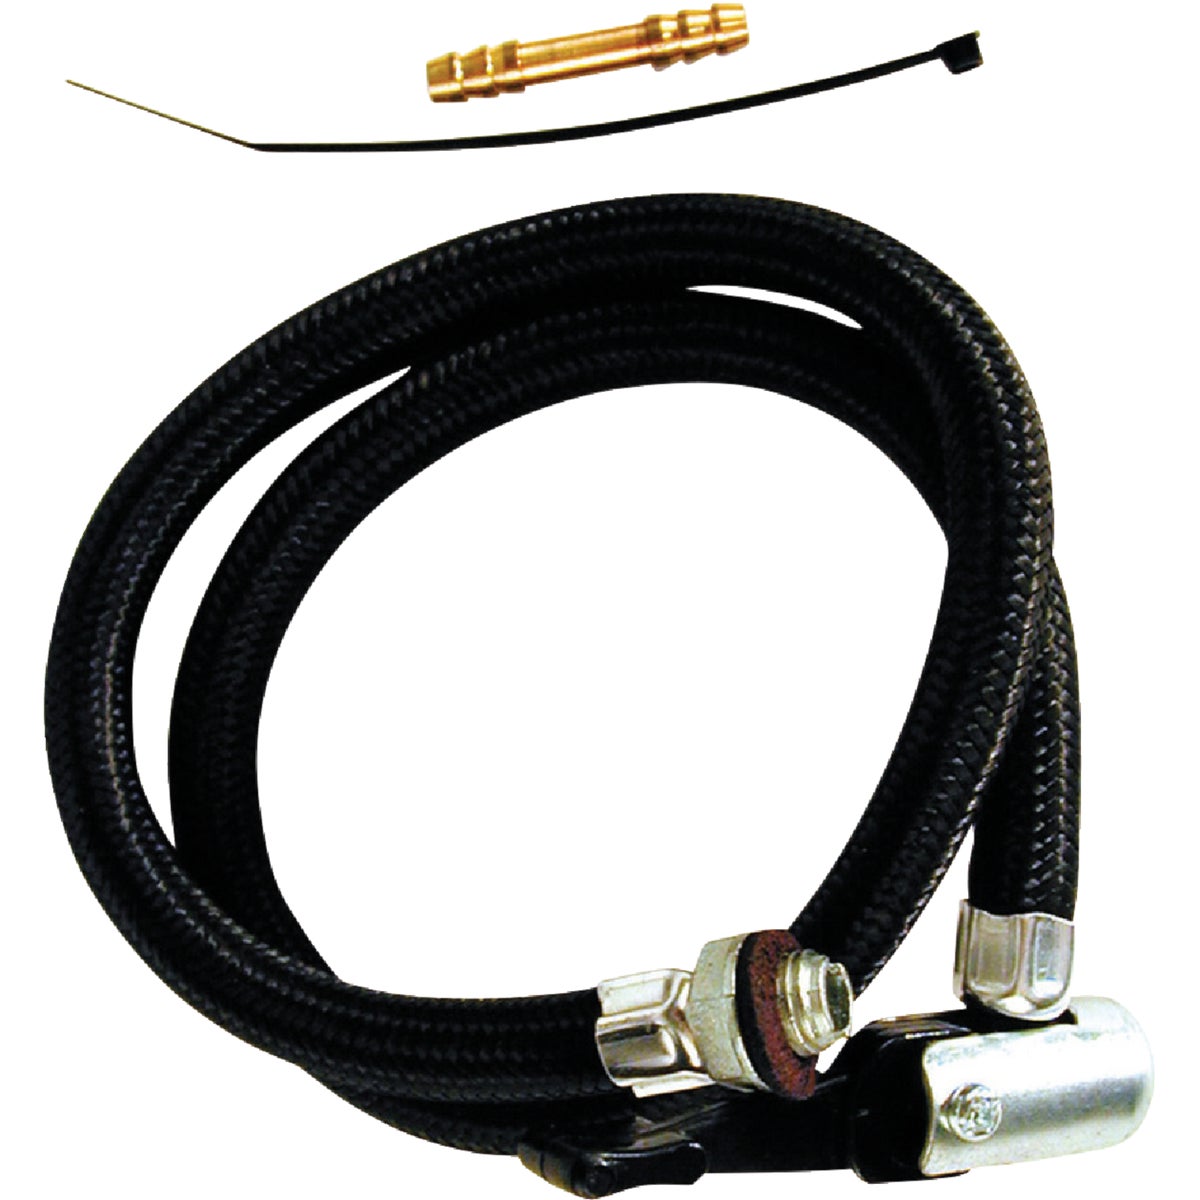 UPC 026137051005 product image for Airpower America 5100 Replacement Hose | upcitemdb.com